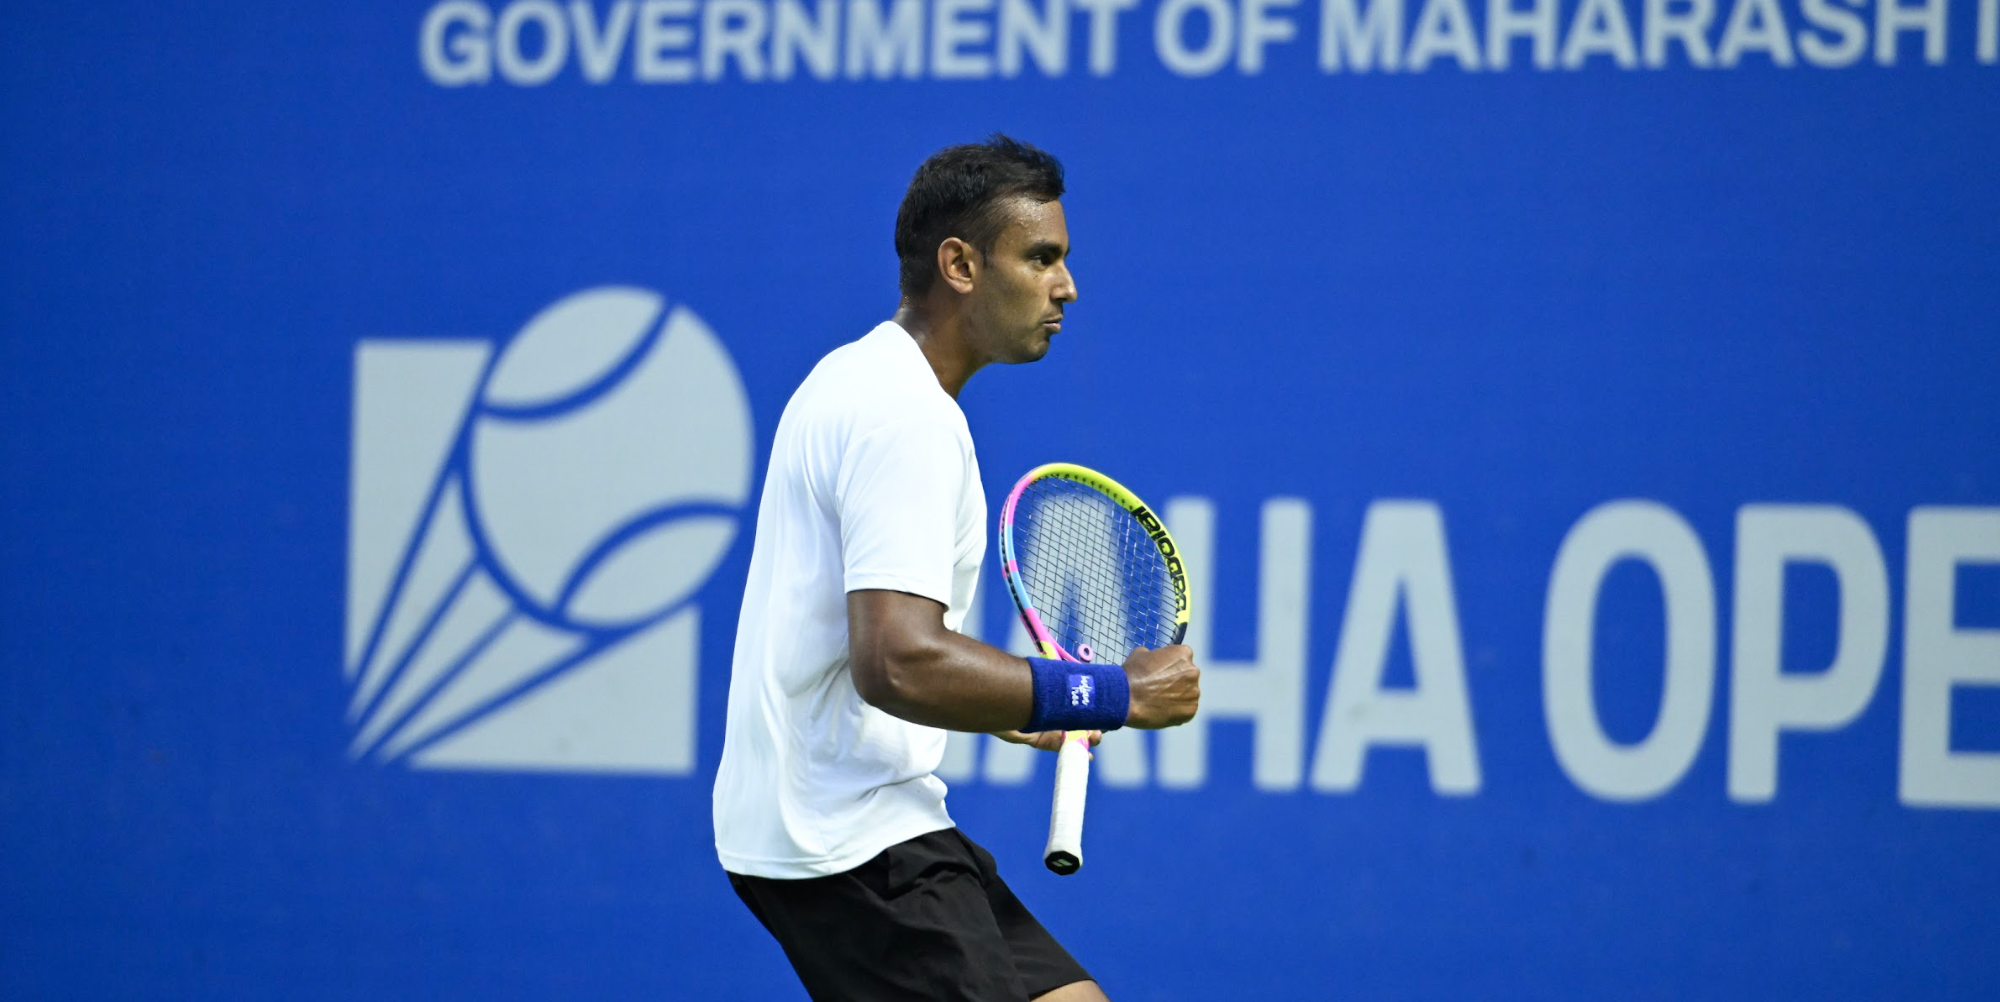 “It’s the best tennis I’ve played in my career” – Mukund Sasikumar, after beating Top 200 Federico Gaio